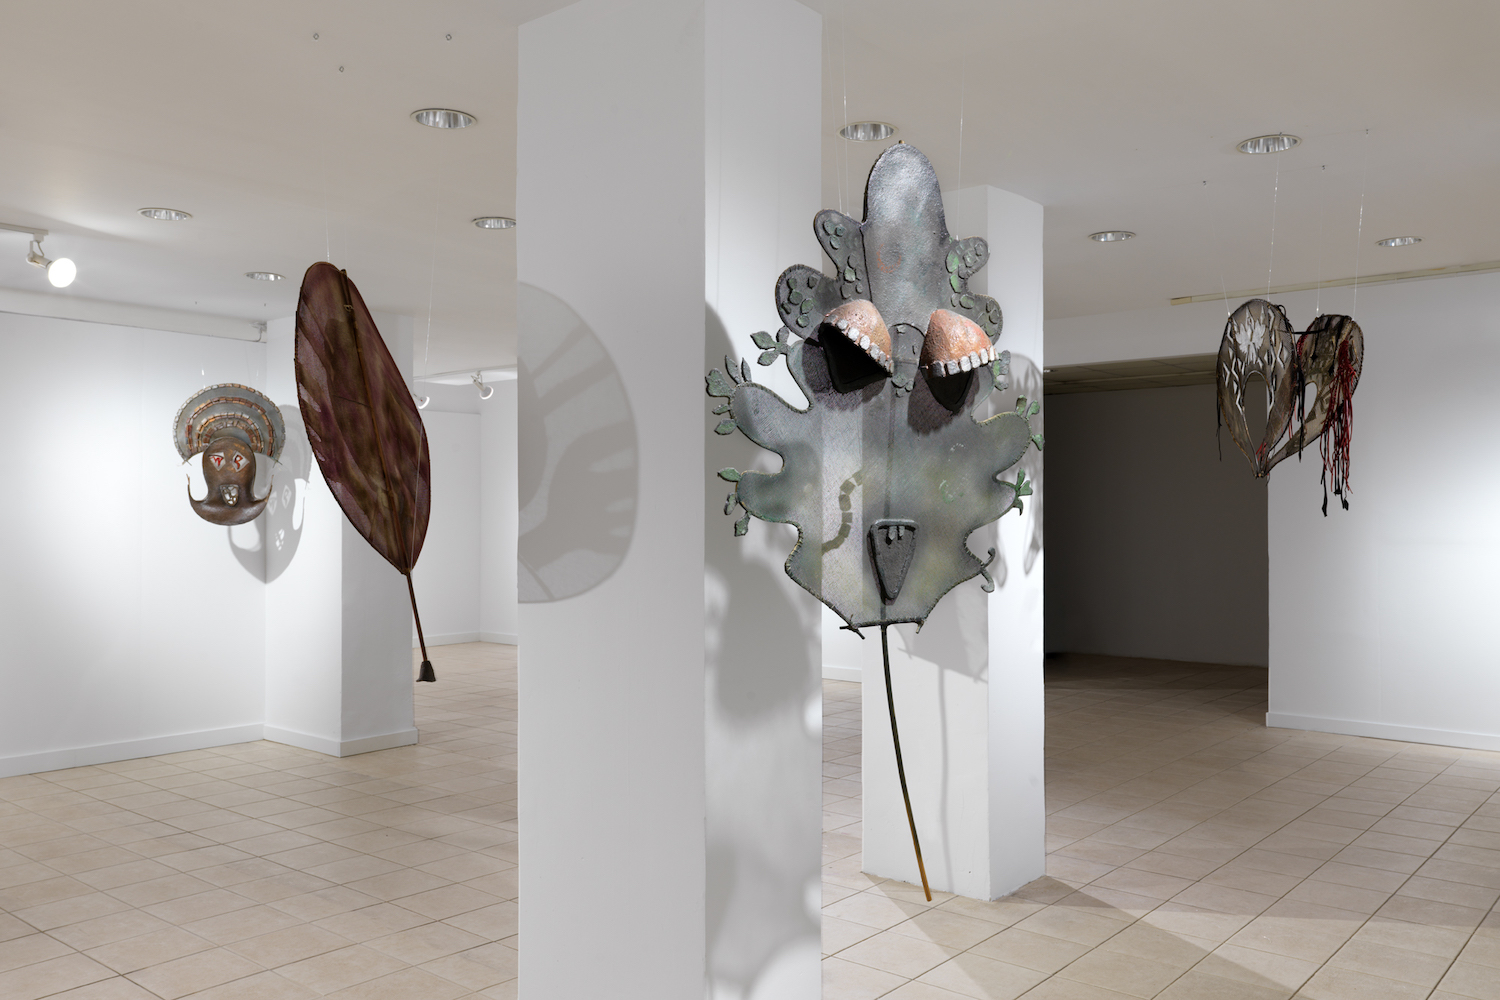   Leonora Carrington: The Story of the Last Egg,  installation view, Gallery Wendi Norris Offsite, 926 Madison Avenue, New York, NY, May 23 — June 29, 2019, photography: Dan Bradica 